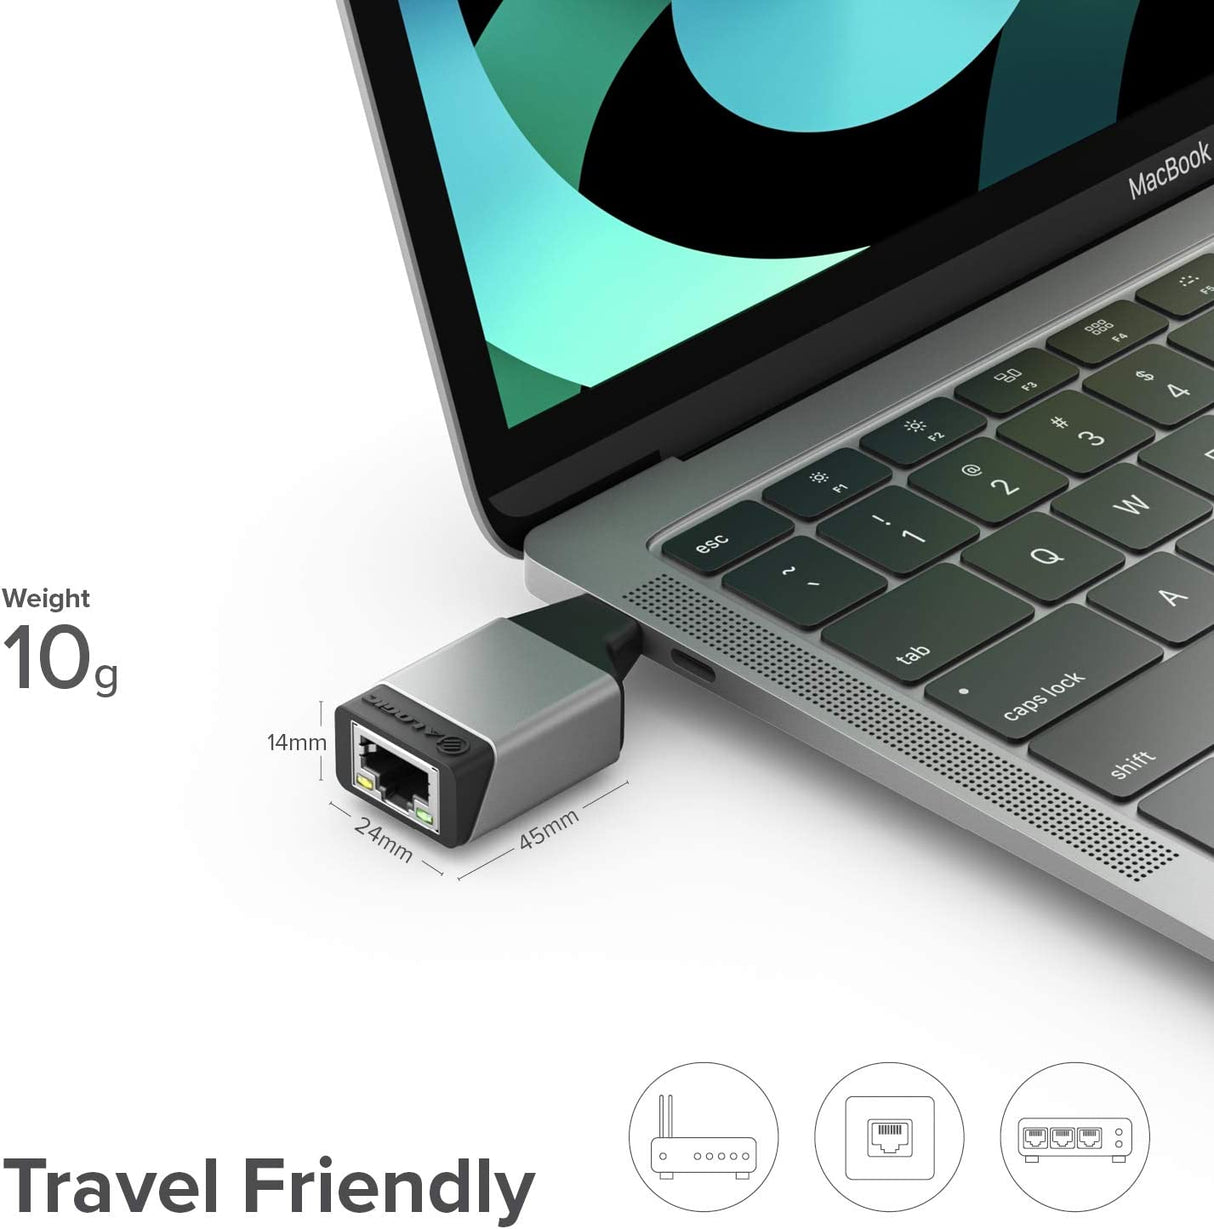 ALOGIC USB C to Gigabit Ethernet Mini Adapter,RJ45 Port, Supports 10/100/1000Mbps network connections, Compatible for iPad Pro, Macbook Pro, Samsung Galaxy, Pixel, MacBook Air, Surface, iPad and More. - Dealtargets.com